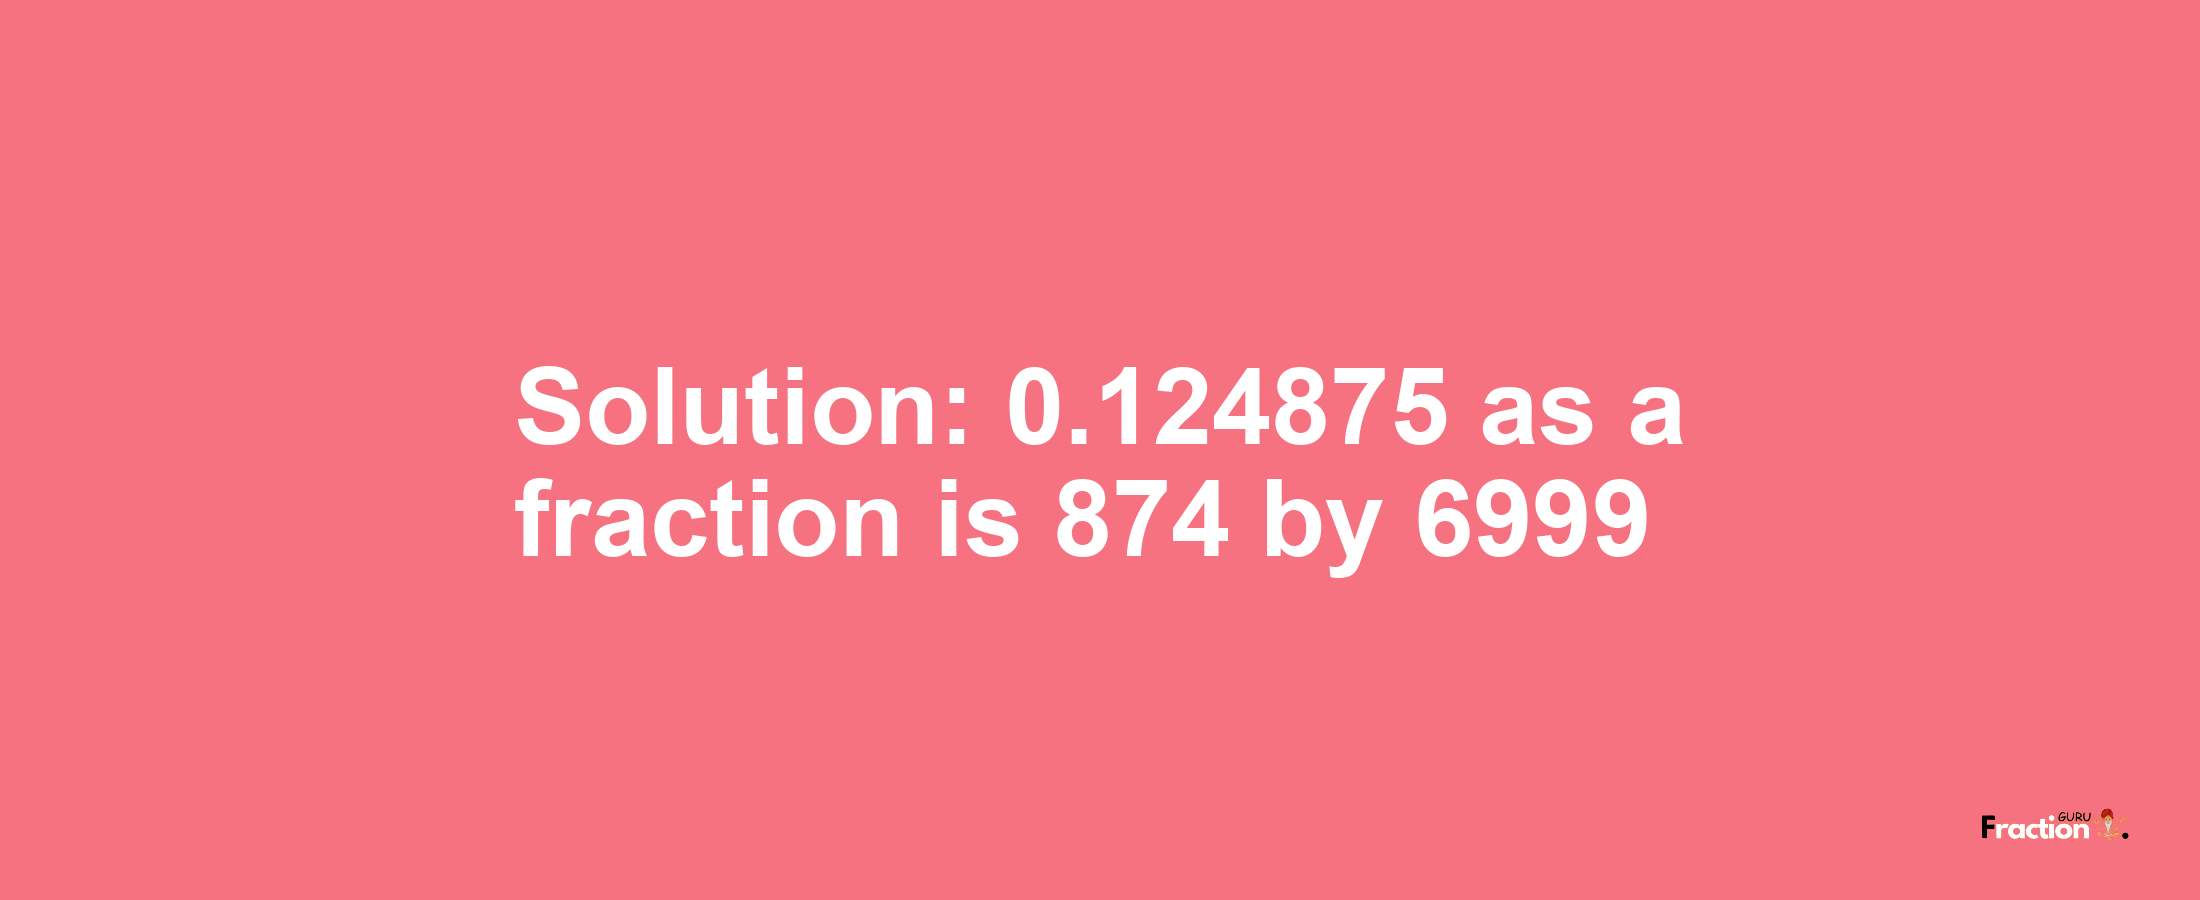 Solution:0.124875 as a fraction is 874/6999